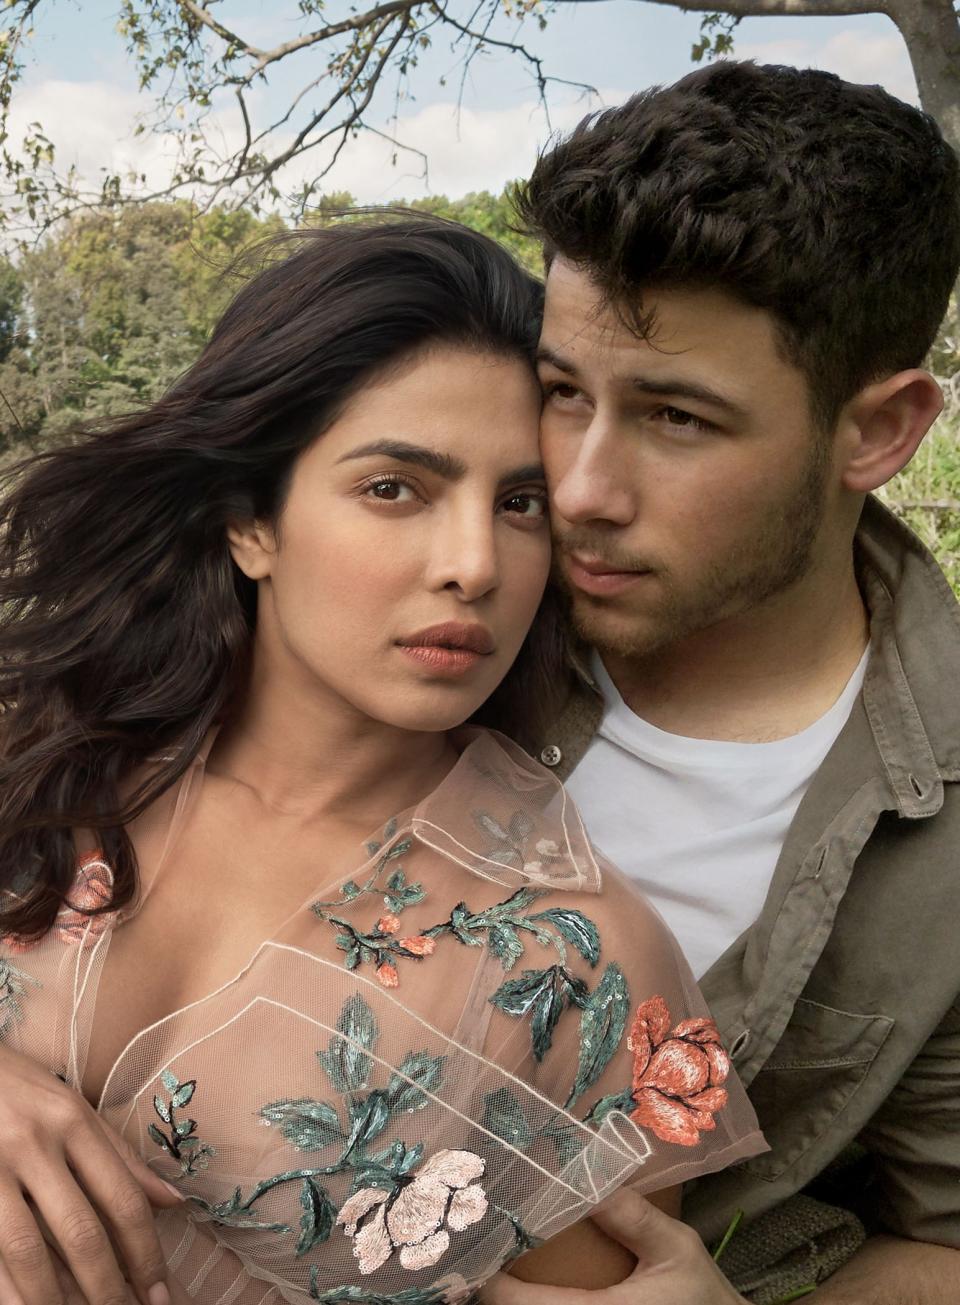 He proposed after how many weeks? But as actor Priyanka Chopra and pop idol Nick Jonas tell it, their love story was two years (and many, many text messages) in the making.